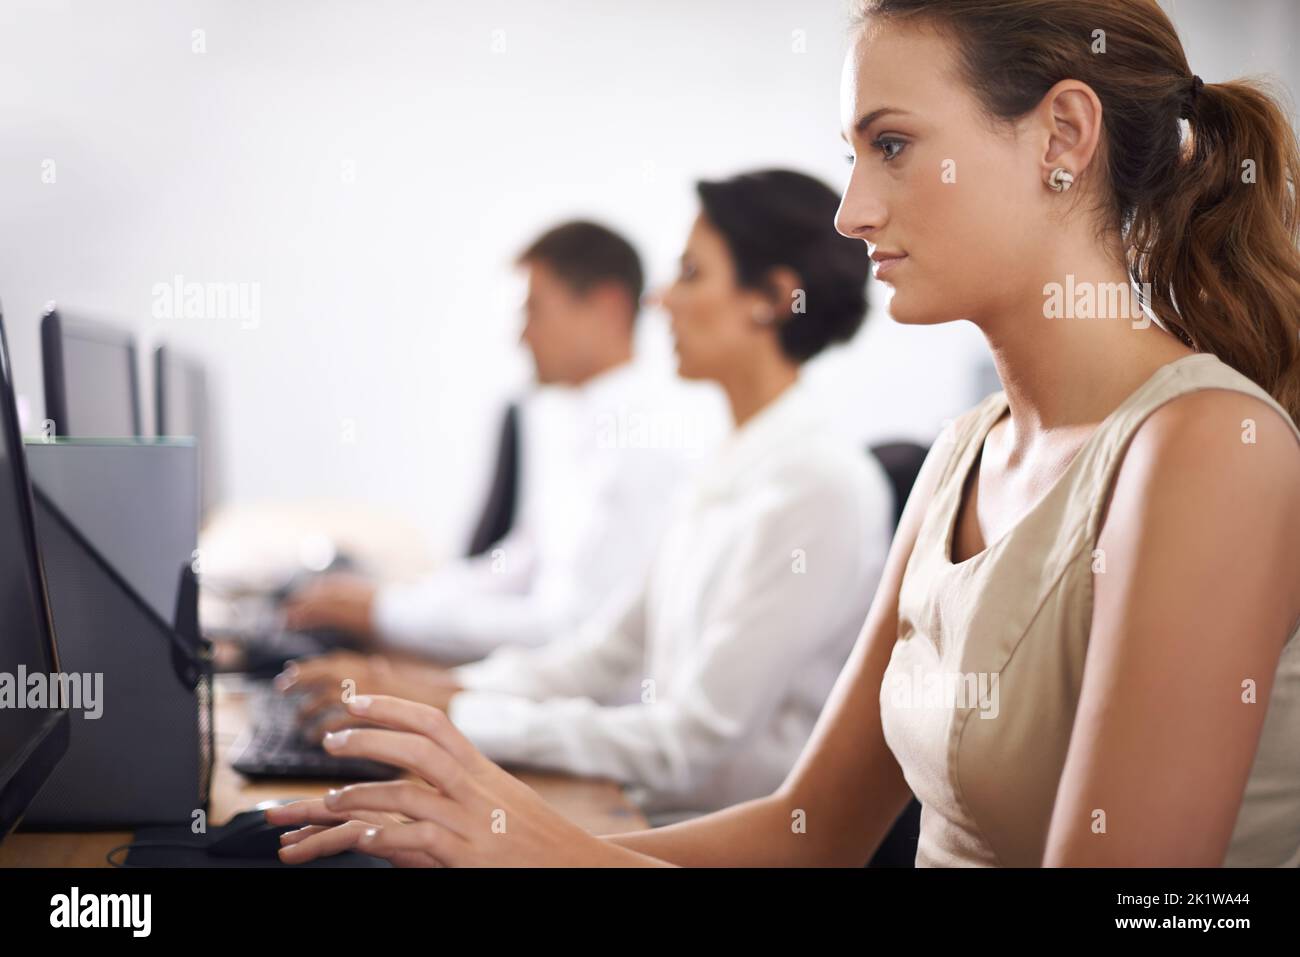 Fully focussed on her work. an attractive young office worker at her computer with her colleagues in the background. Stock Photo